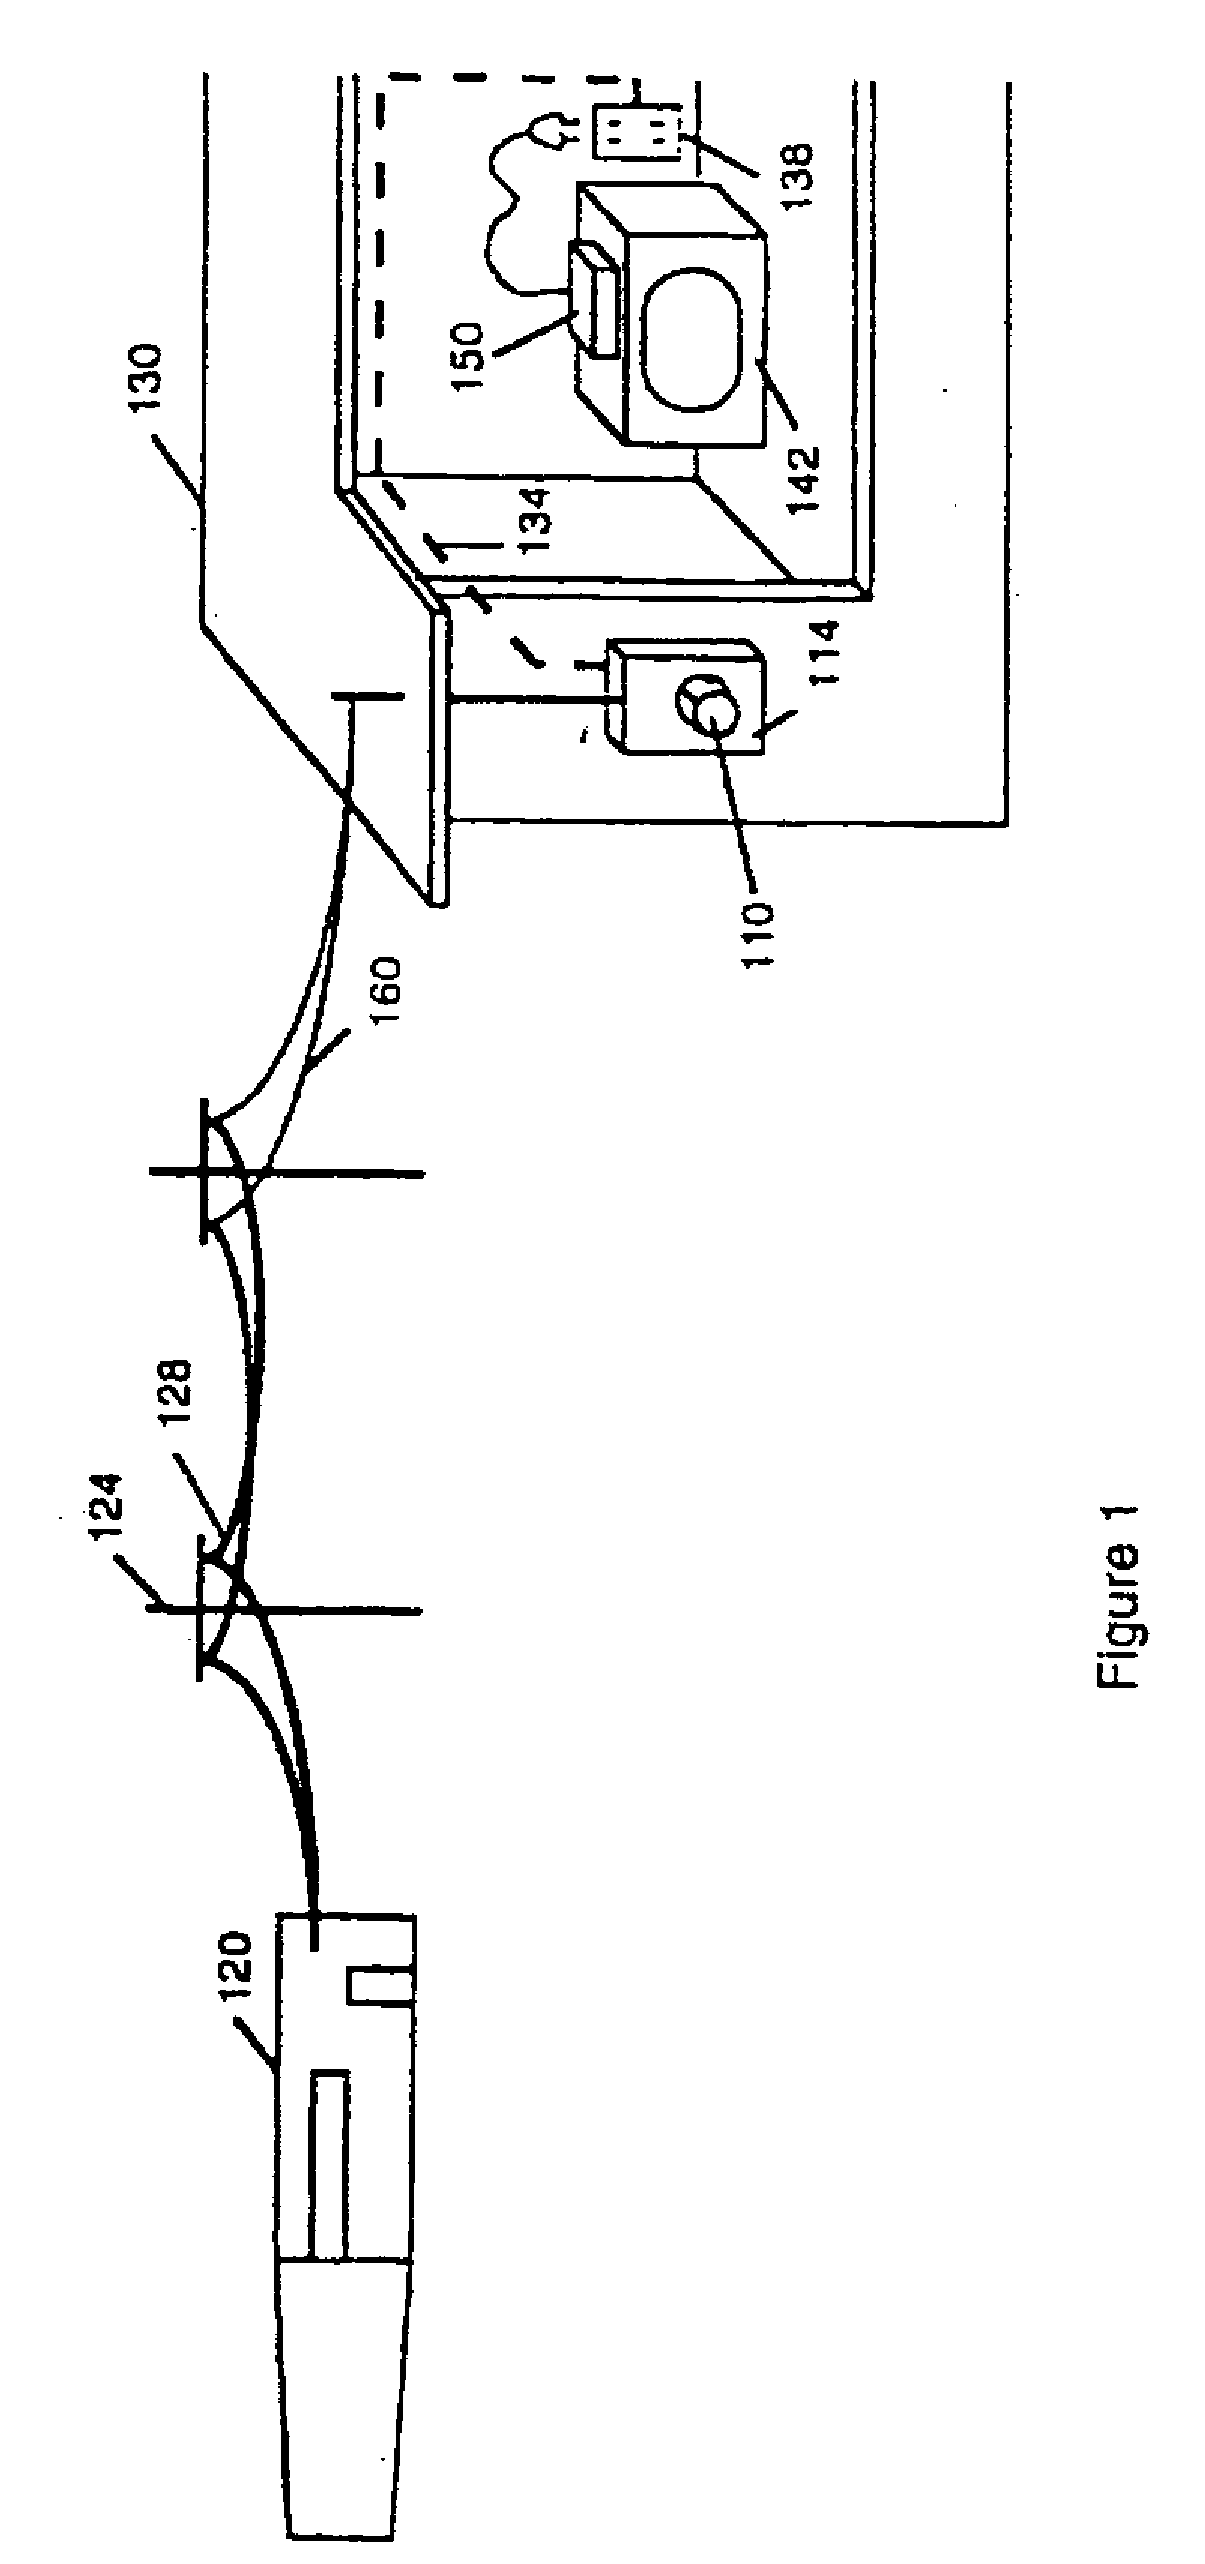 Multifunction data port providing an interface between a digital network and electronics in residential or commercial structures